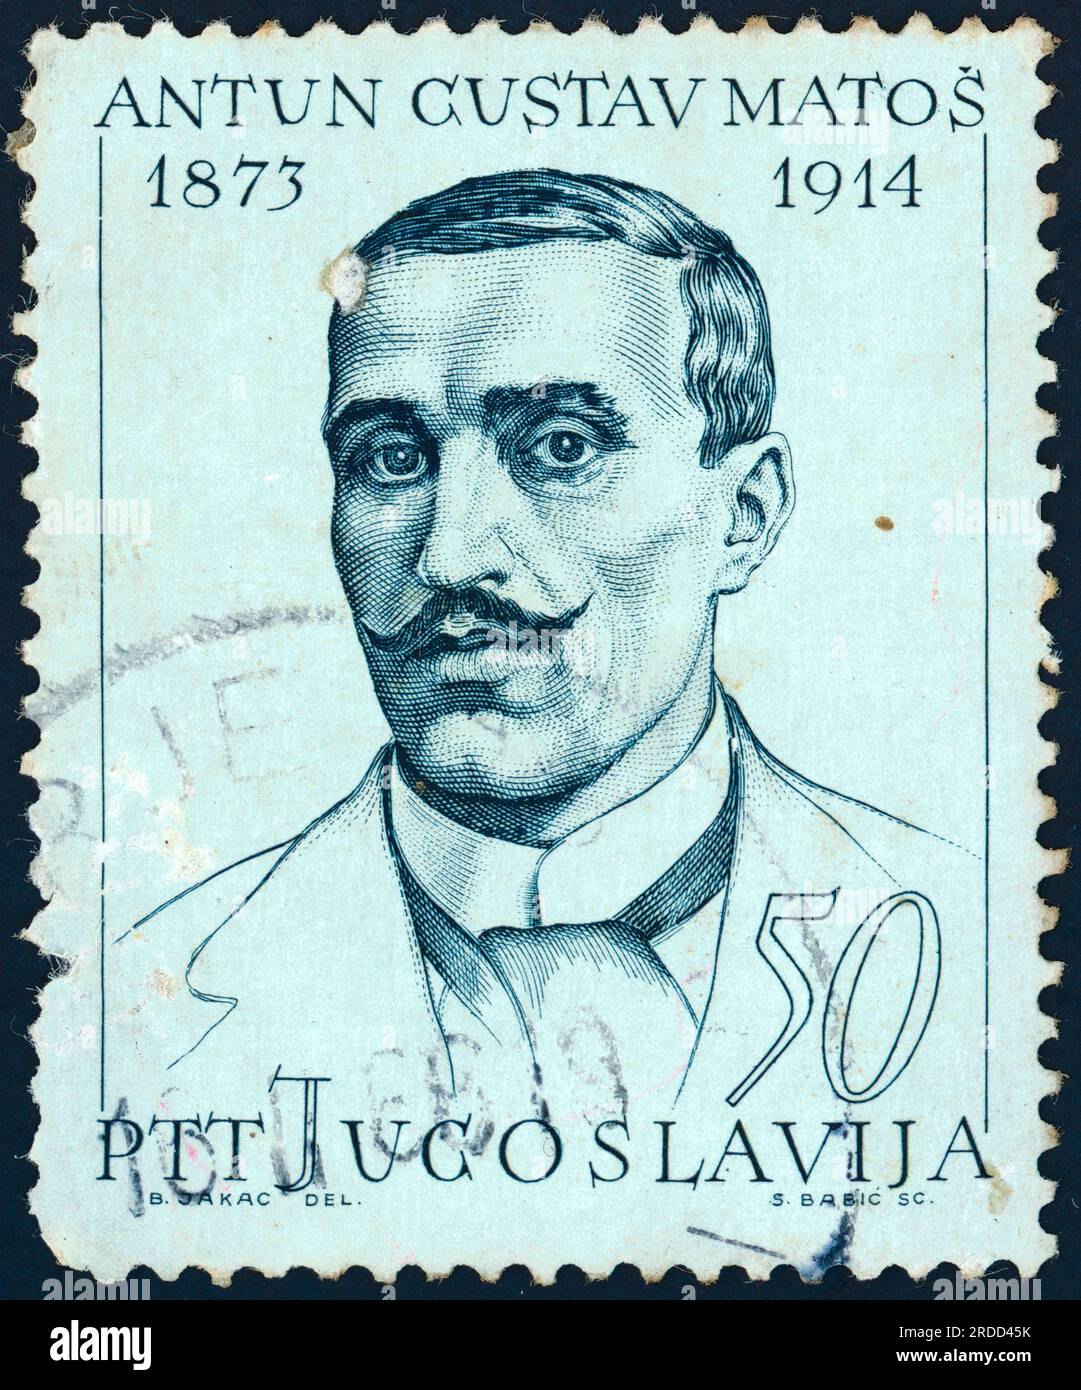 Antun Gustav Matoš (1873 – 1914). Postage stamp issued in Yugoslavia in 1965. Antun Gustav Matoš was a Croatian poet, short story writer, journalist, essayist and travelogue writer. He is considered the champion of Croatian modernist literature, opening Croatia to the currents of European modernism. Stock Photo